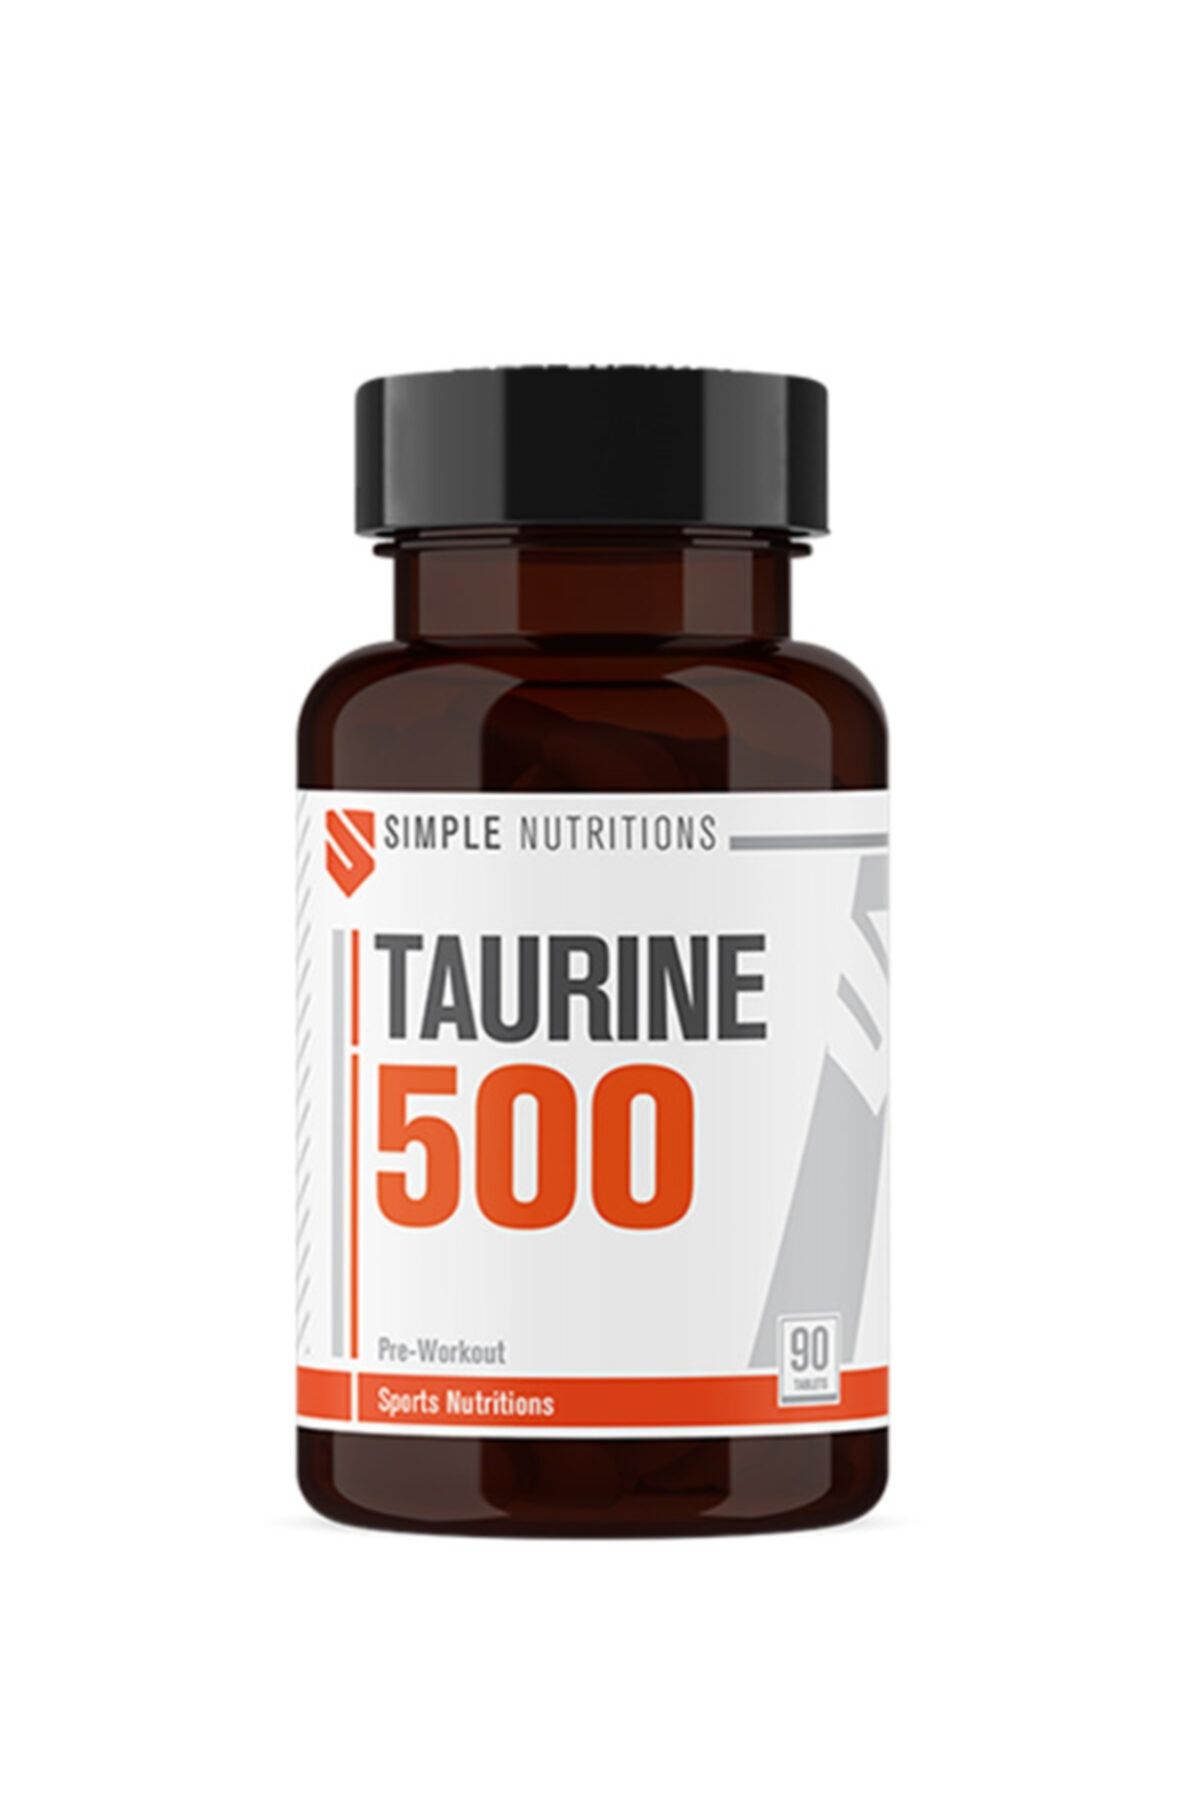 Simple Nutritions Taurine 500 Mg 90 Tablet